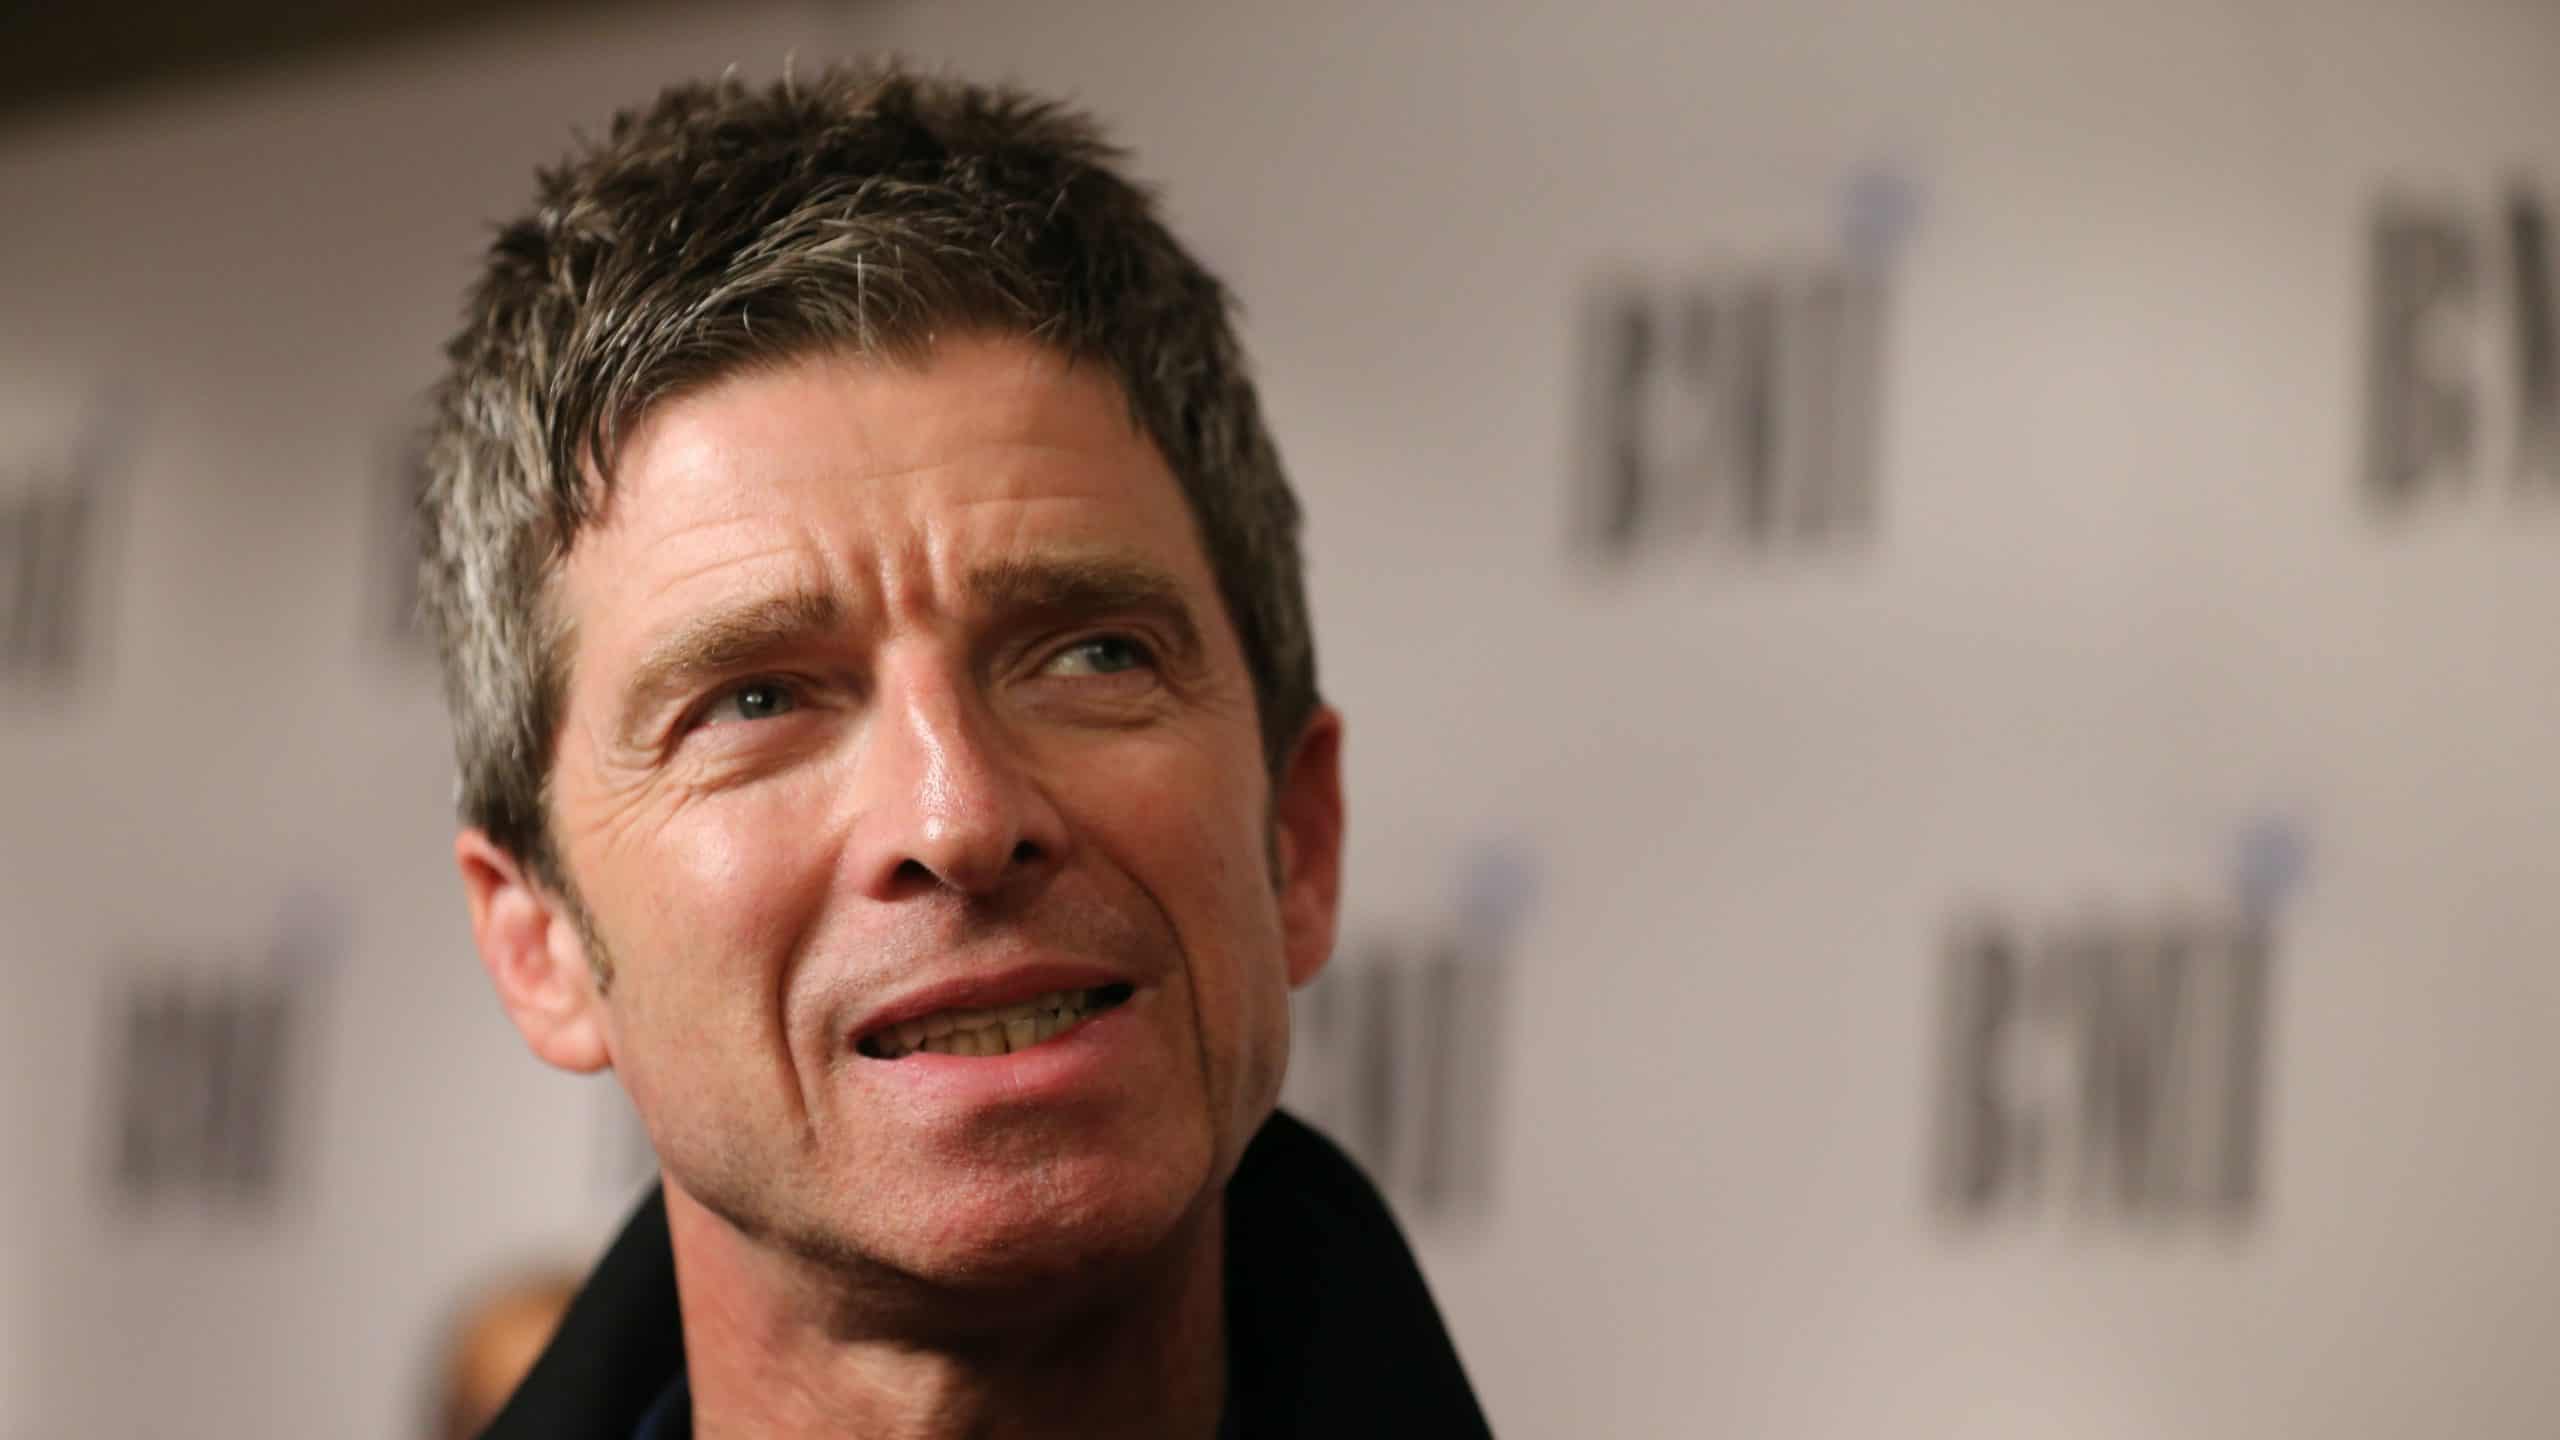 Noel Gallagher refuses to wear mask, saying “if I get the virus it’s on me”